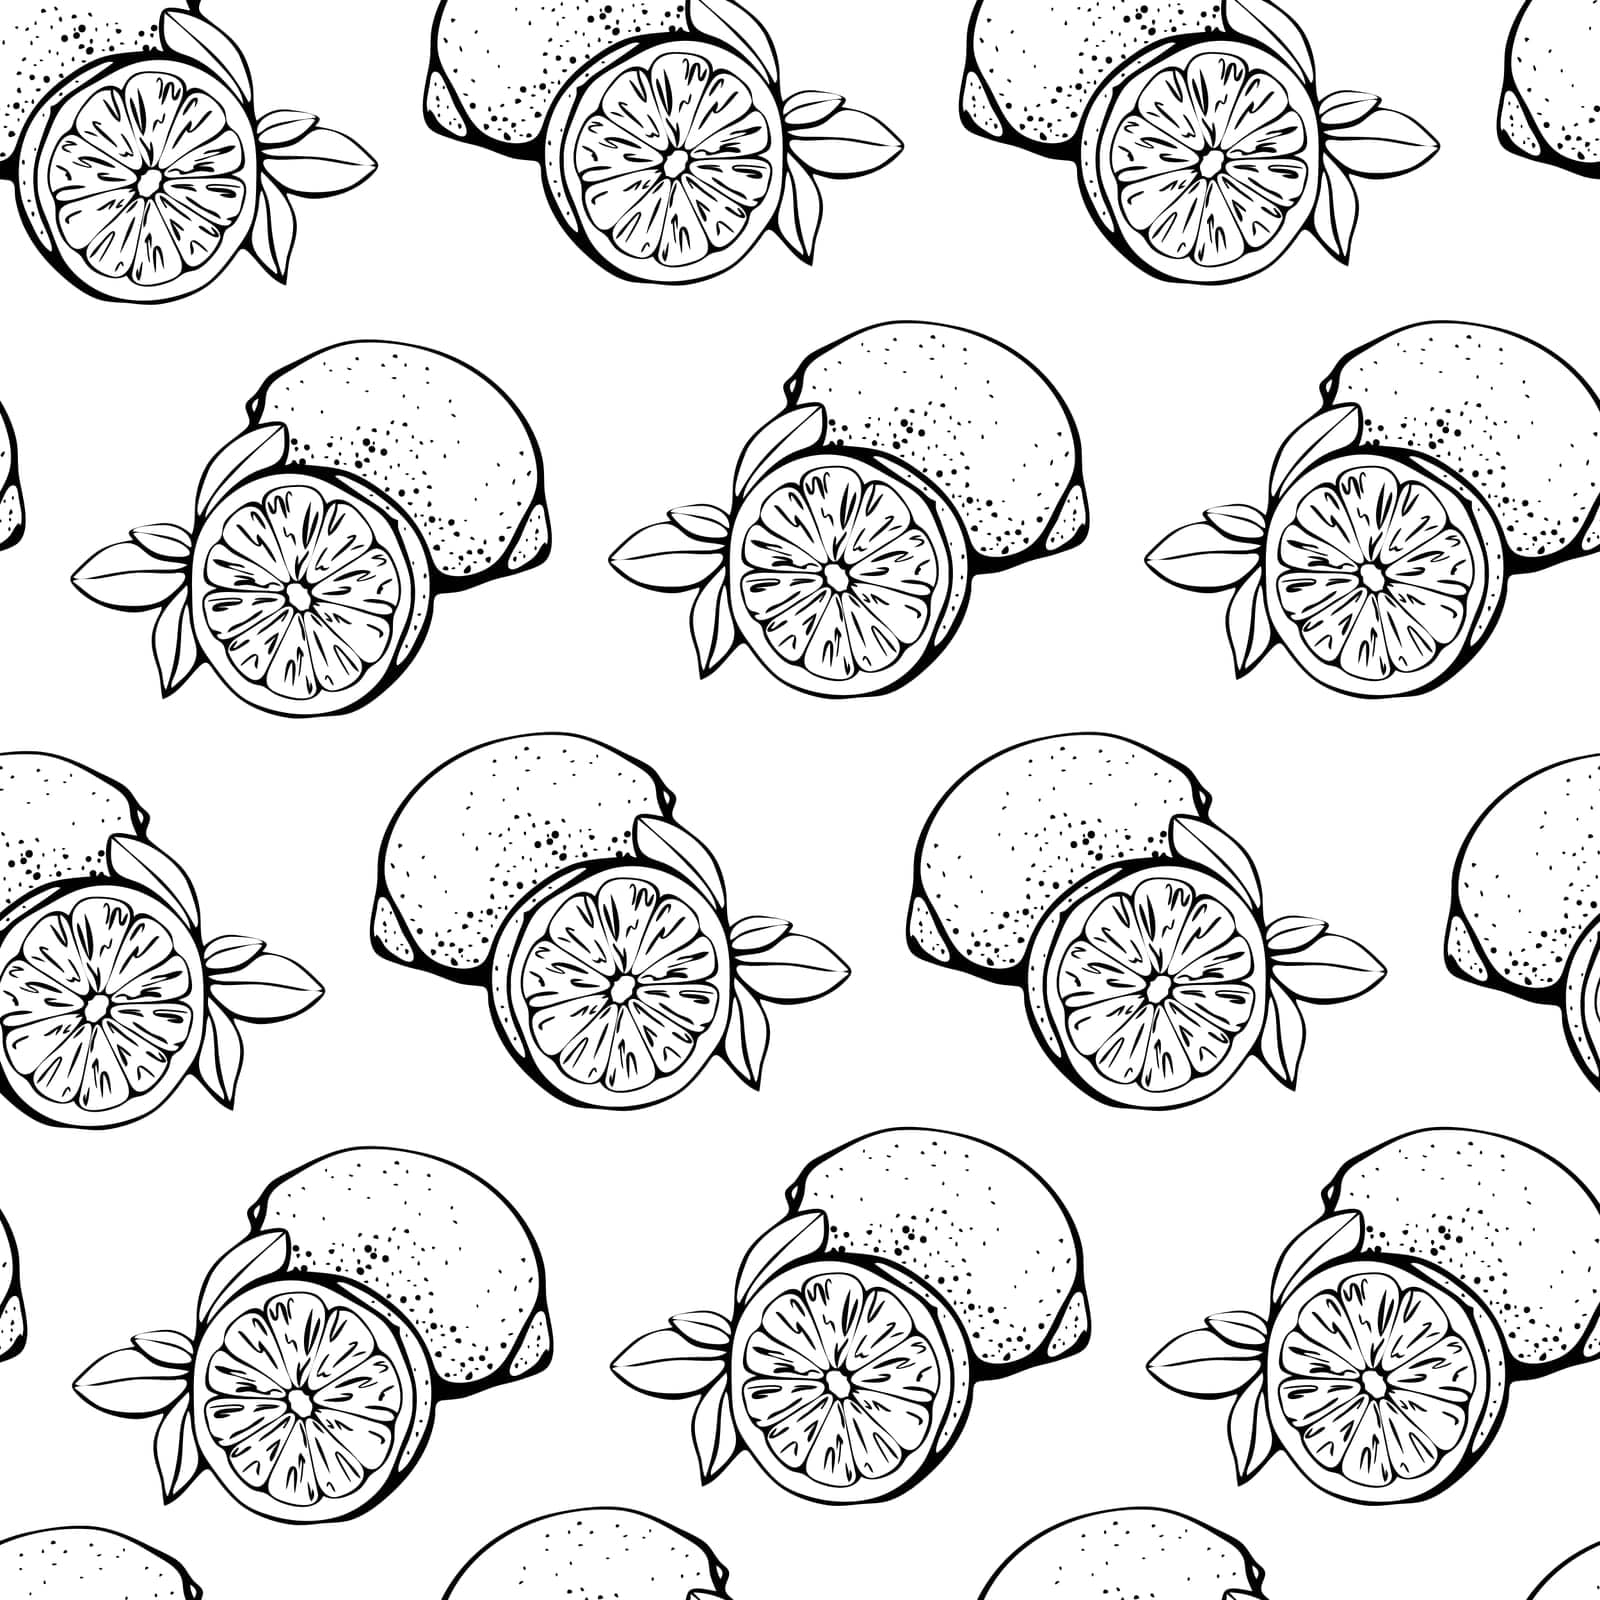 Seamless pattern with lemons,whole and sliced, isolated on a white background.Background with citrus fruits.vector illustration in graphic style.Summer design for textile printing postcards.Hand drawn